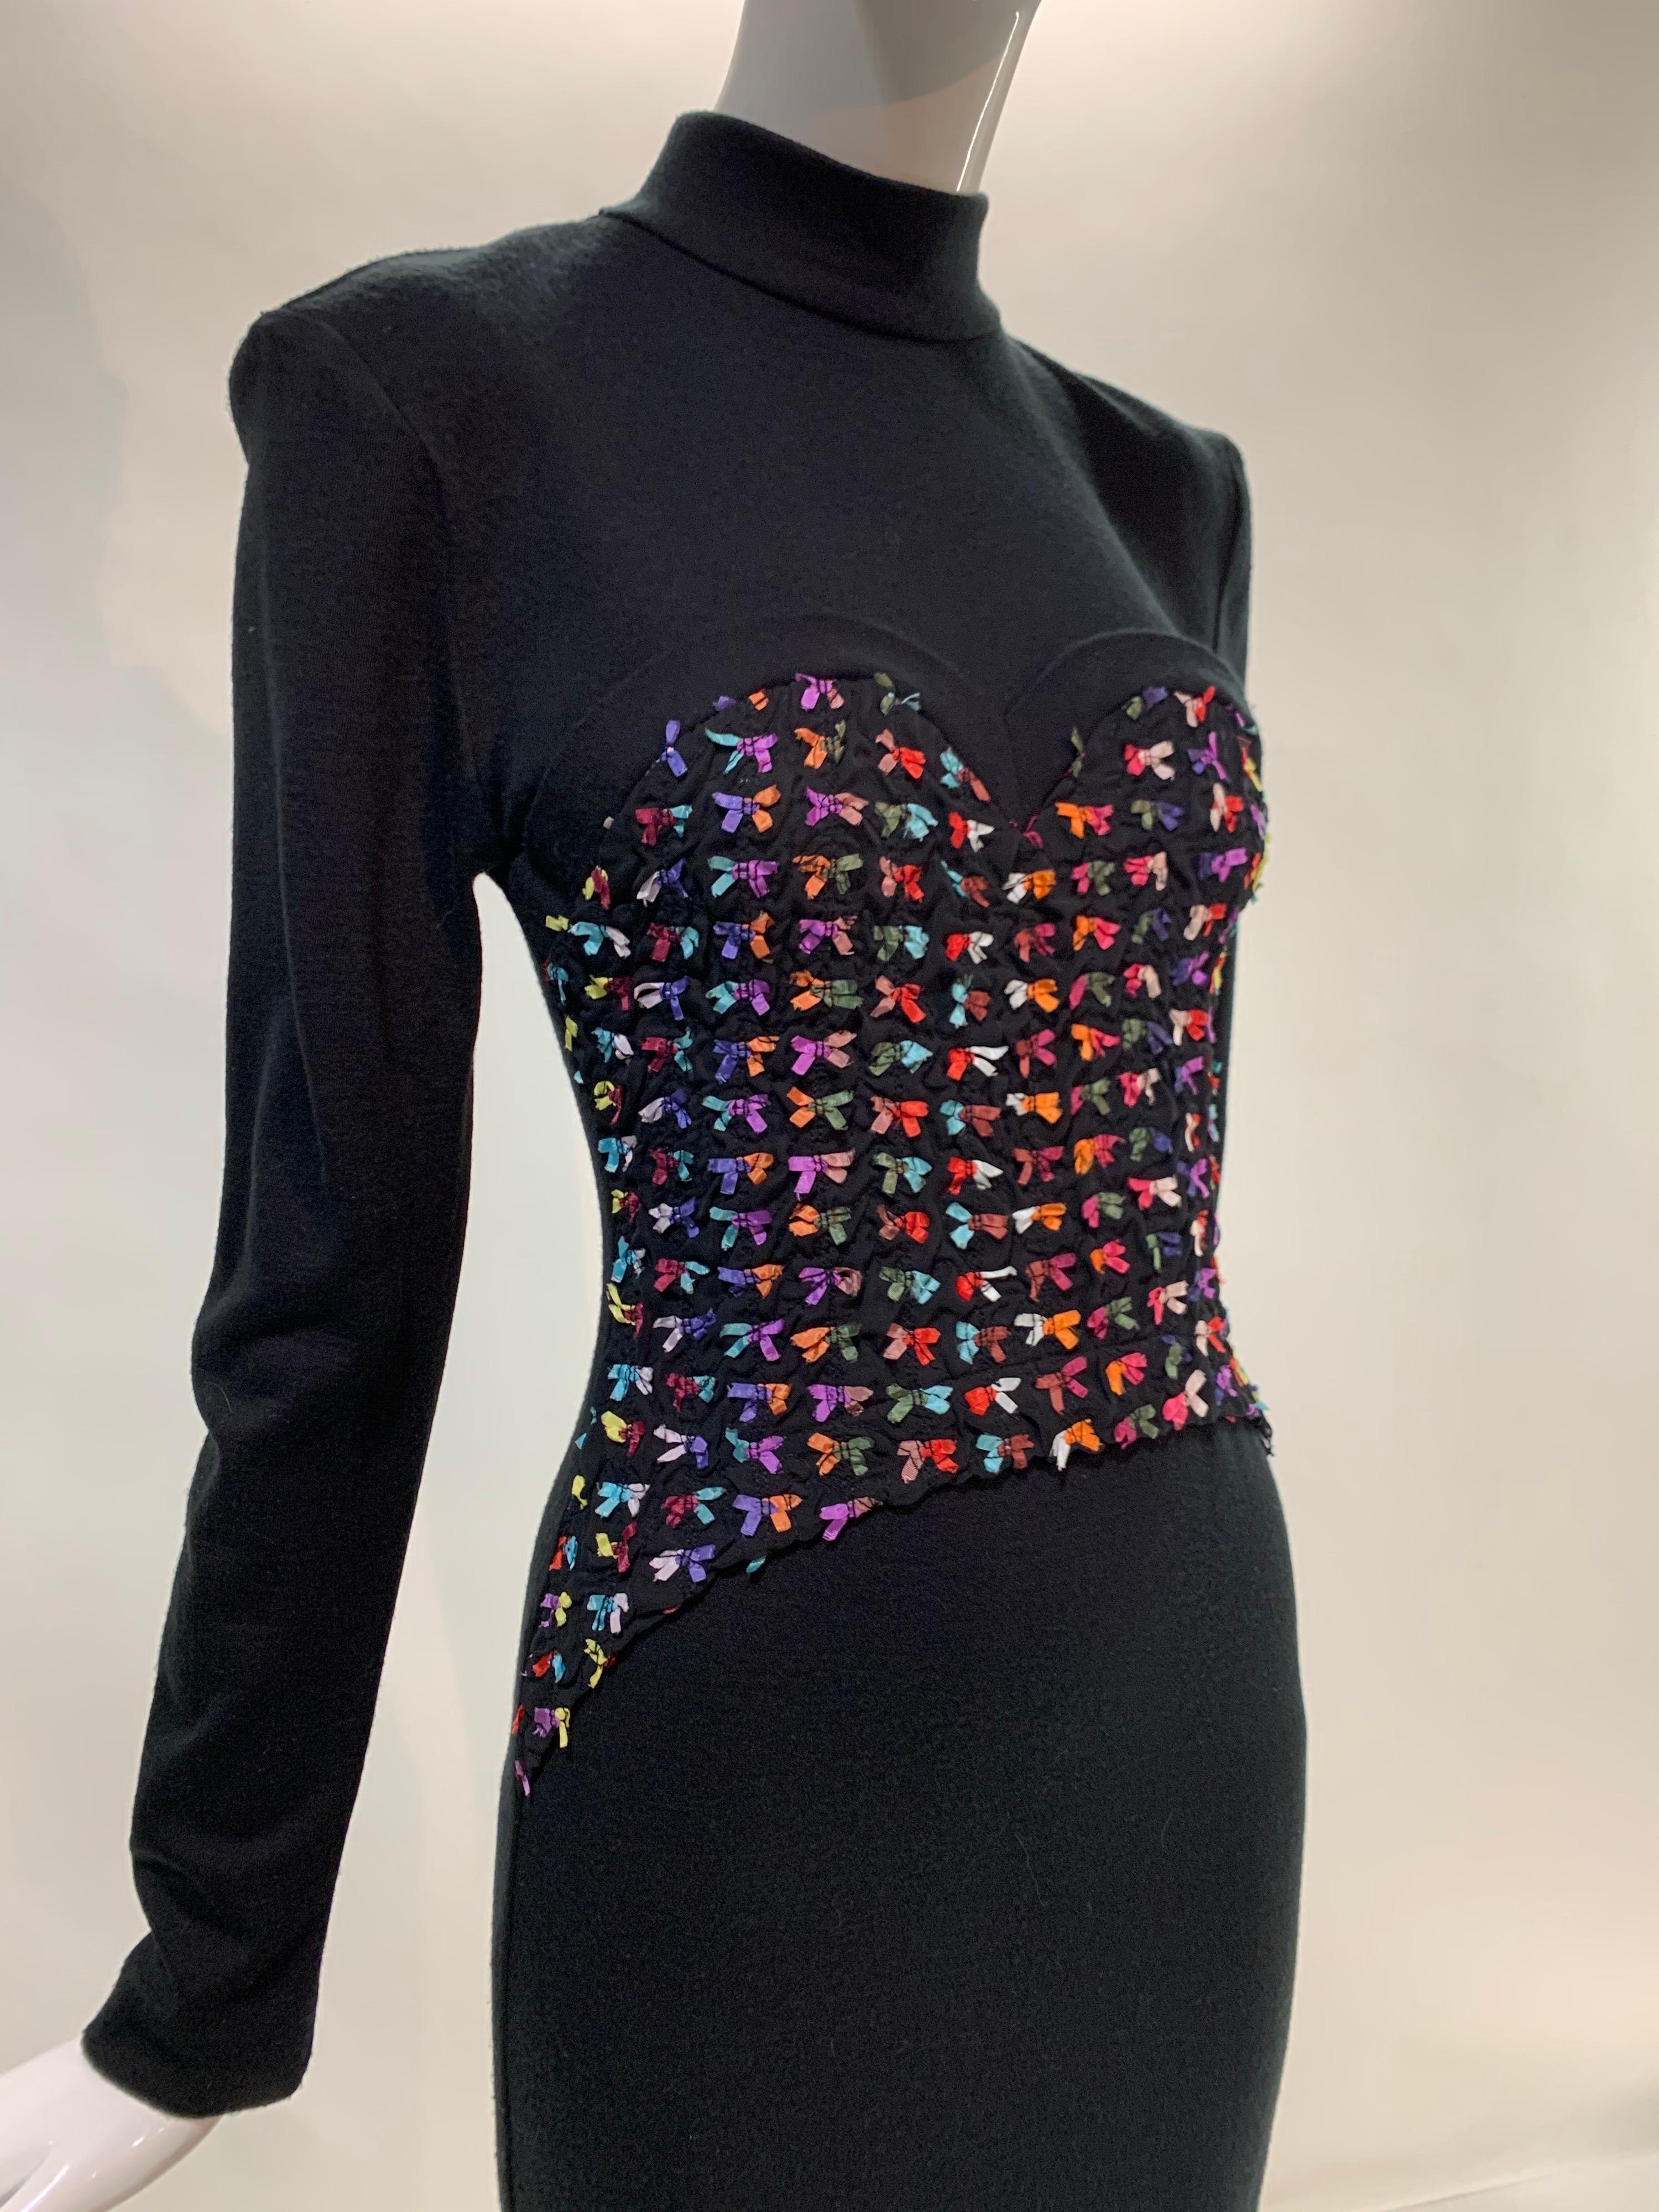 A rare 1980s Patrick Kelly black wool jersey dress with long sleeves and a genius trompe l'oeil corset delineated by tiny rainbow colored ribbon bows!  So witty! Size 4-6.